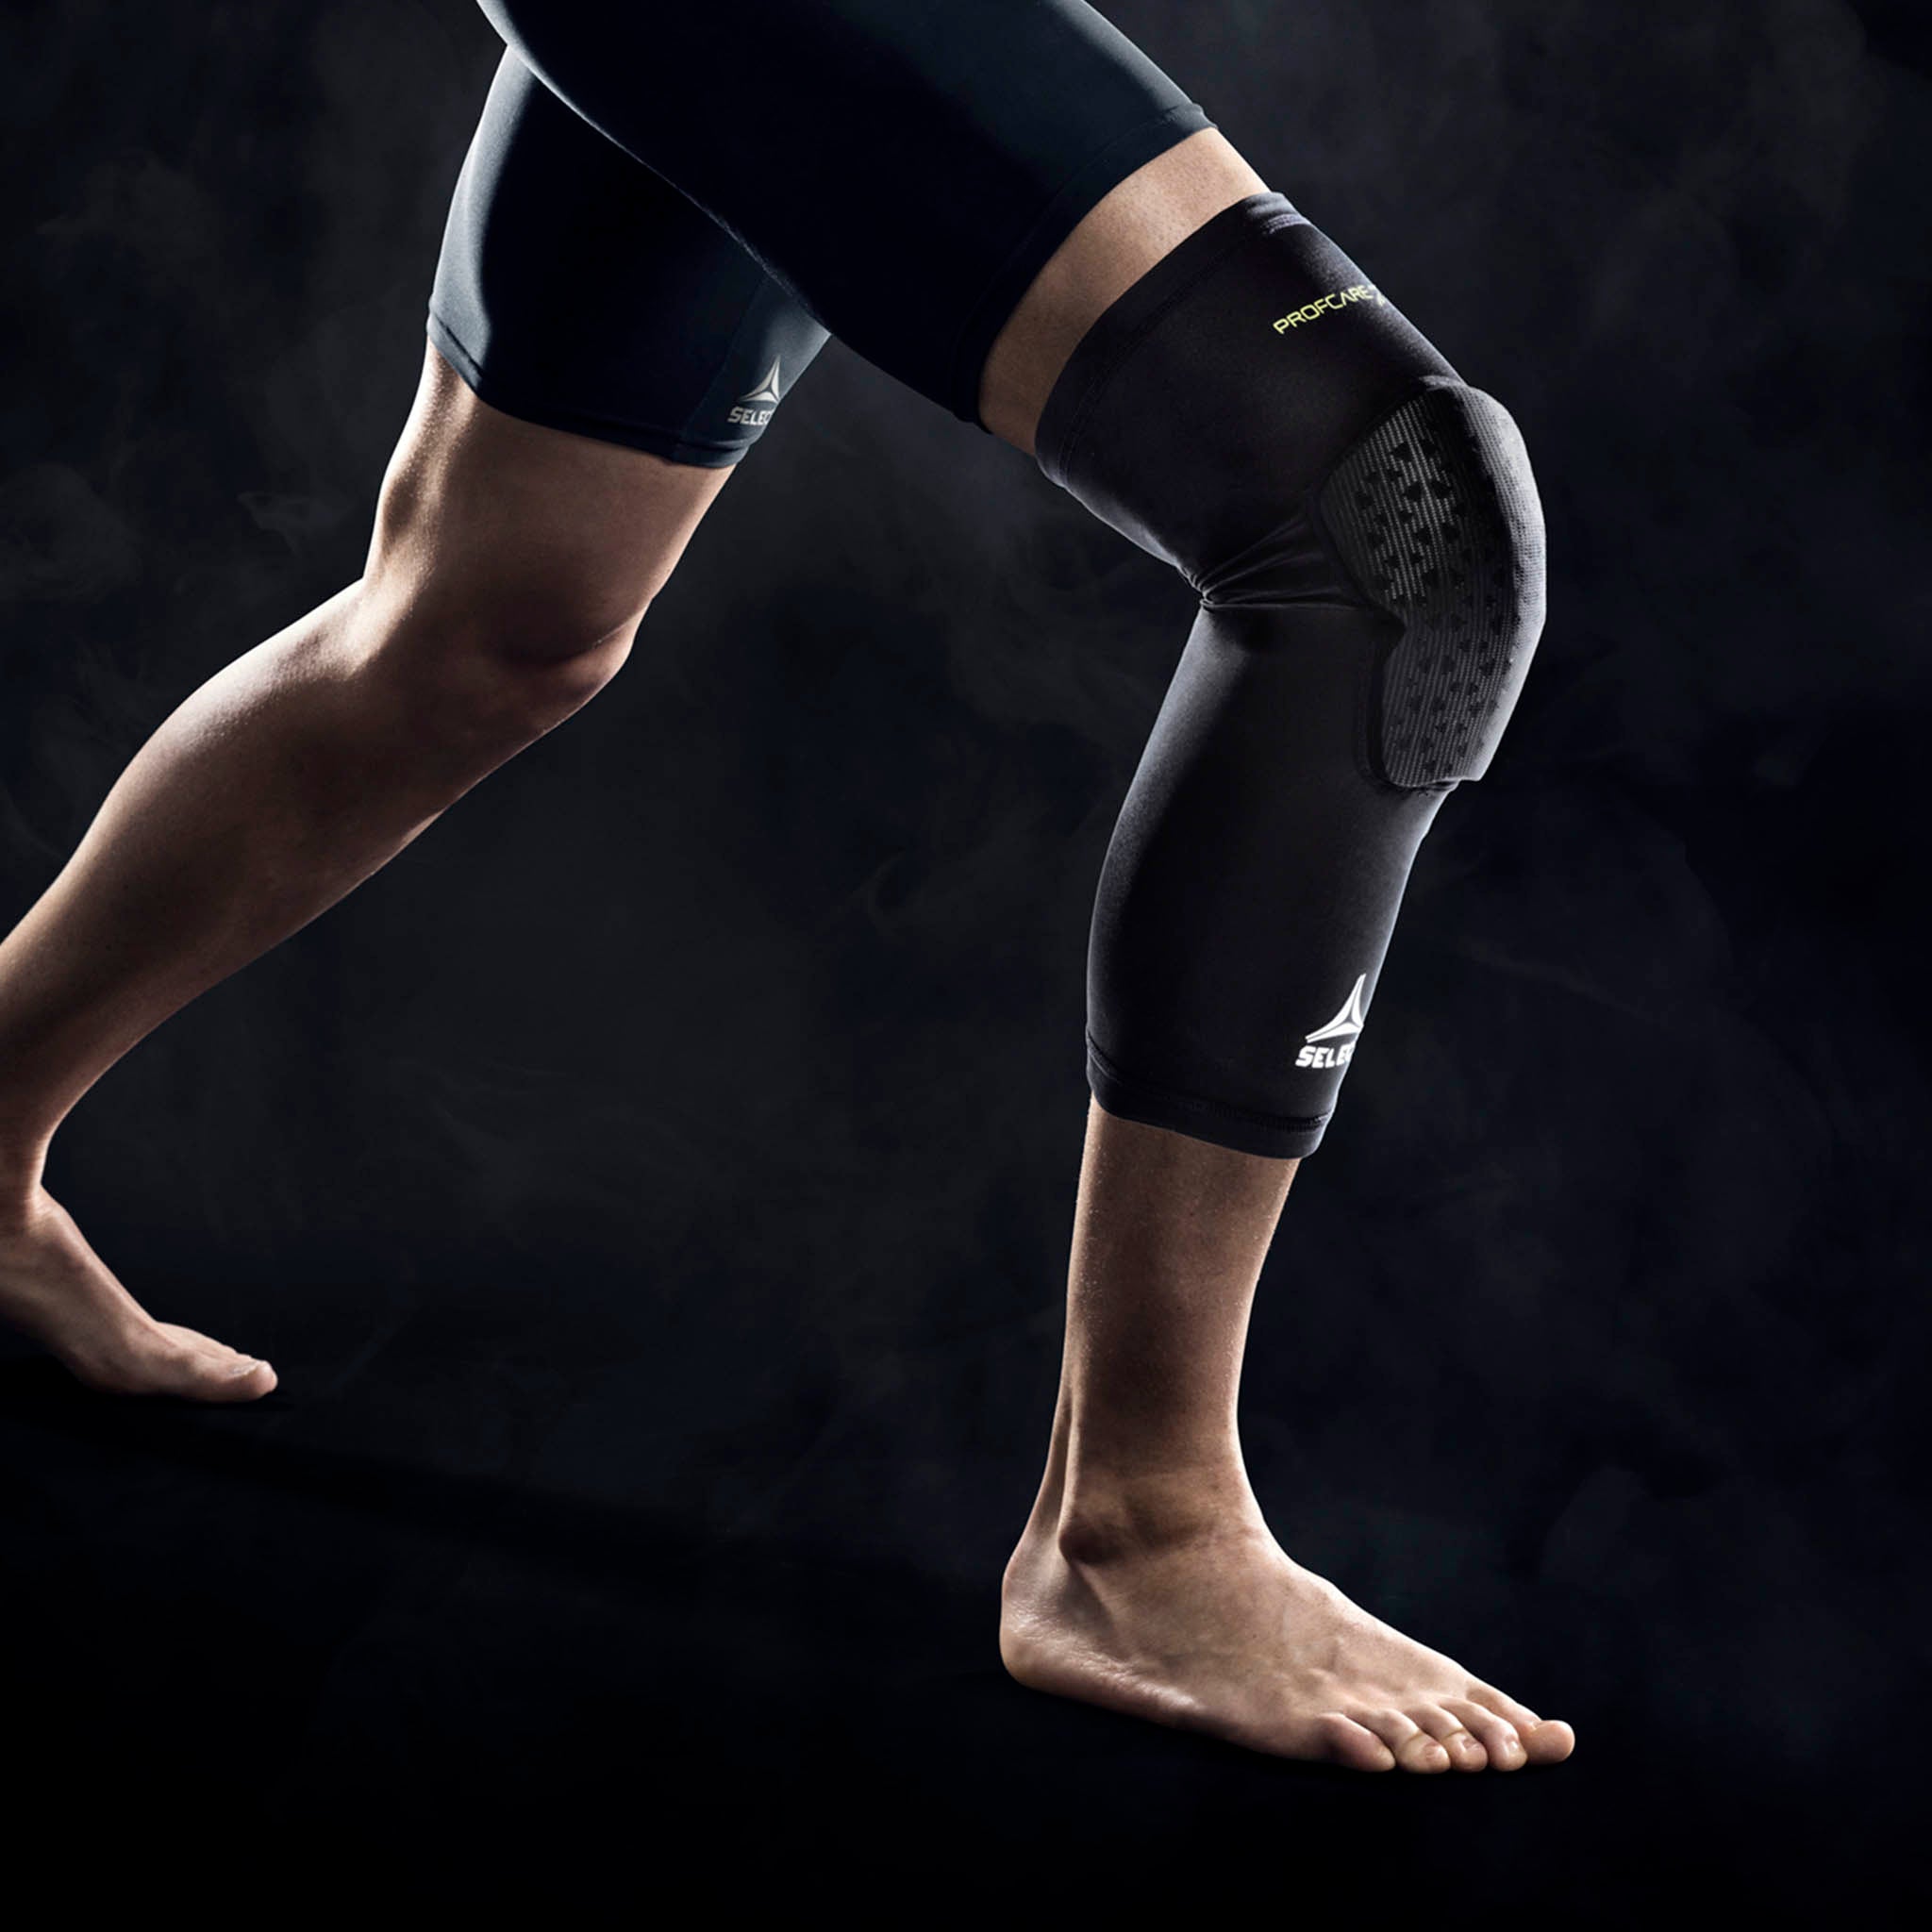 Knee support compression - Long #colour_black